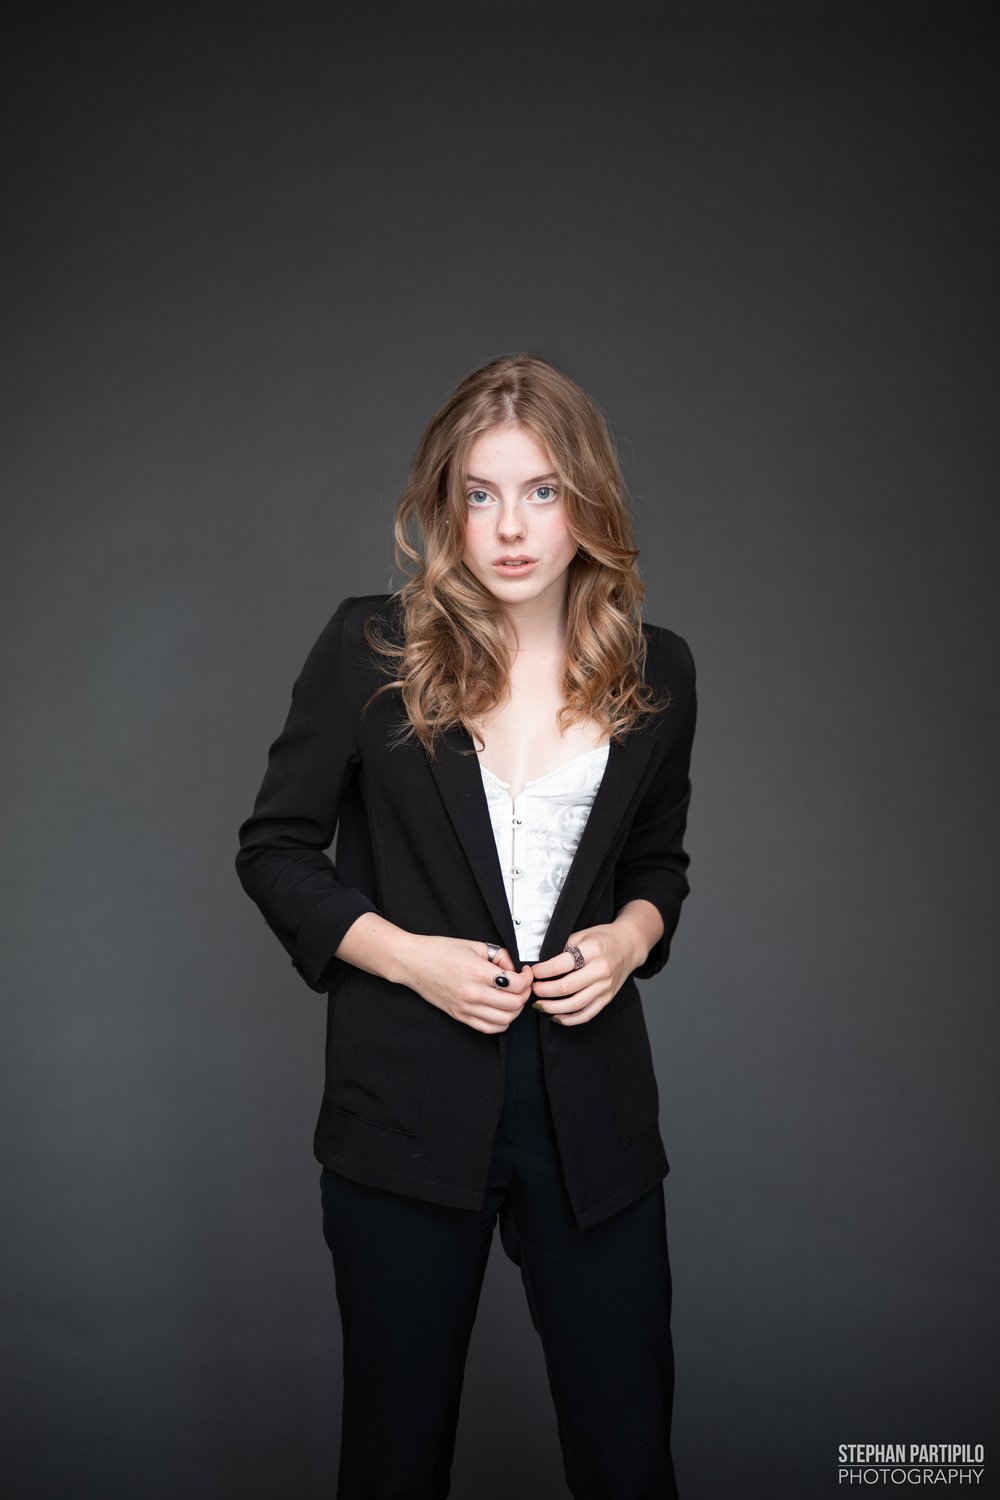 Lydia x Studio Session With Black Fancy Formal Outfit and Grey Background 0G5A4342 copy.jpg